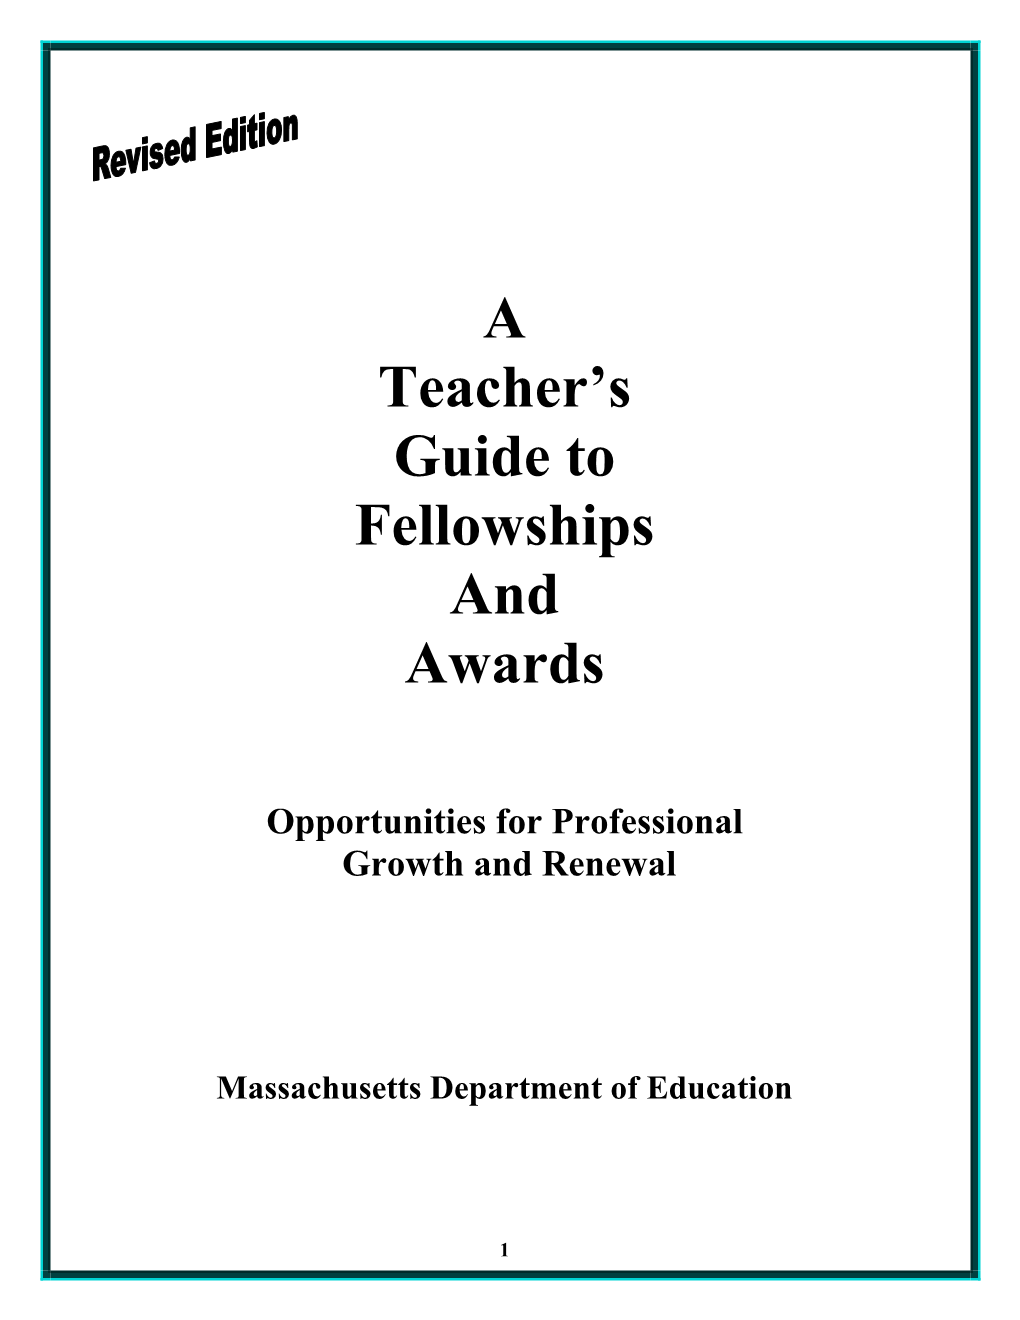 A Teacher's Guide to Fellowships and Awards